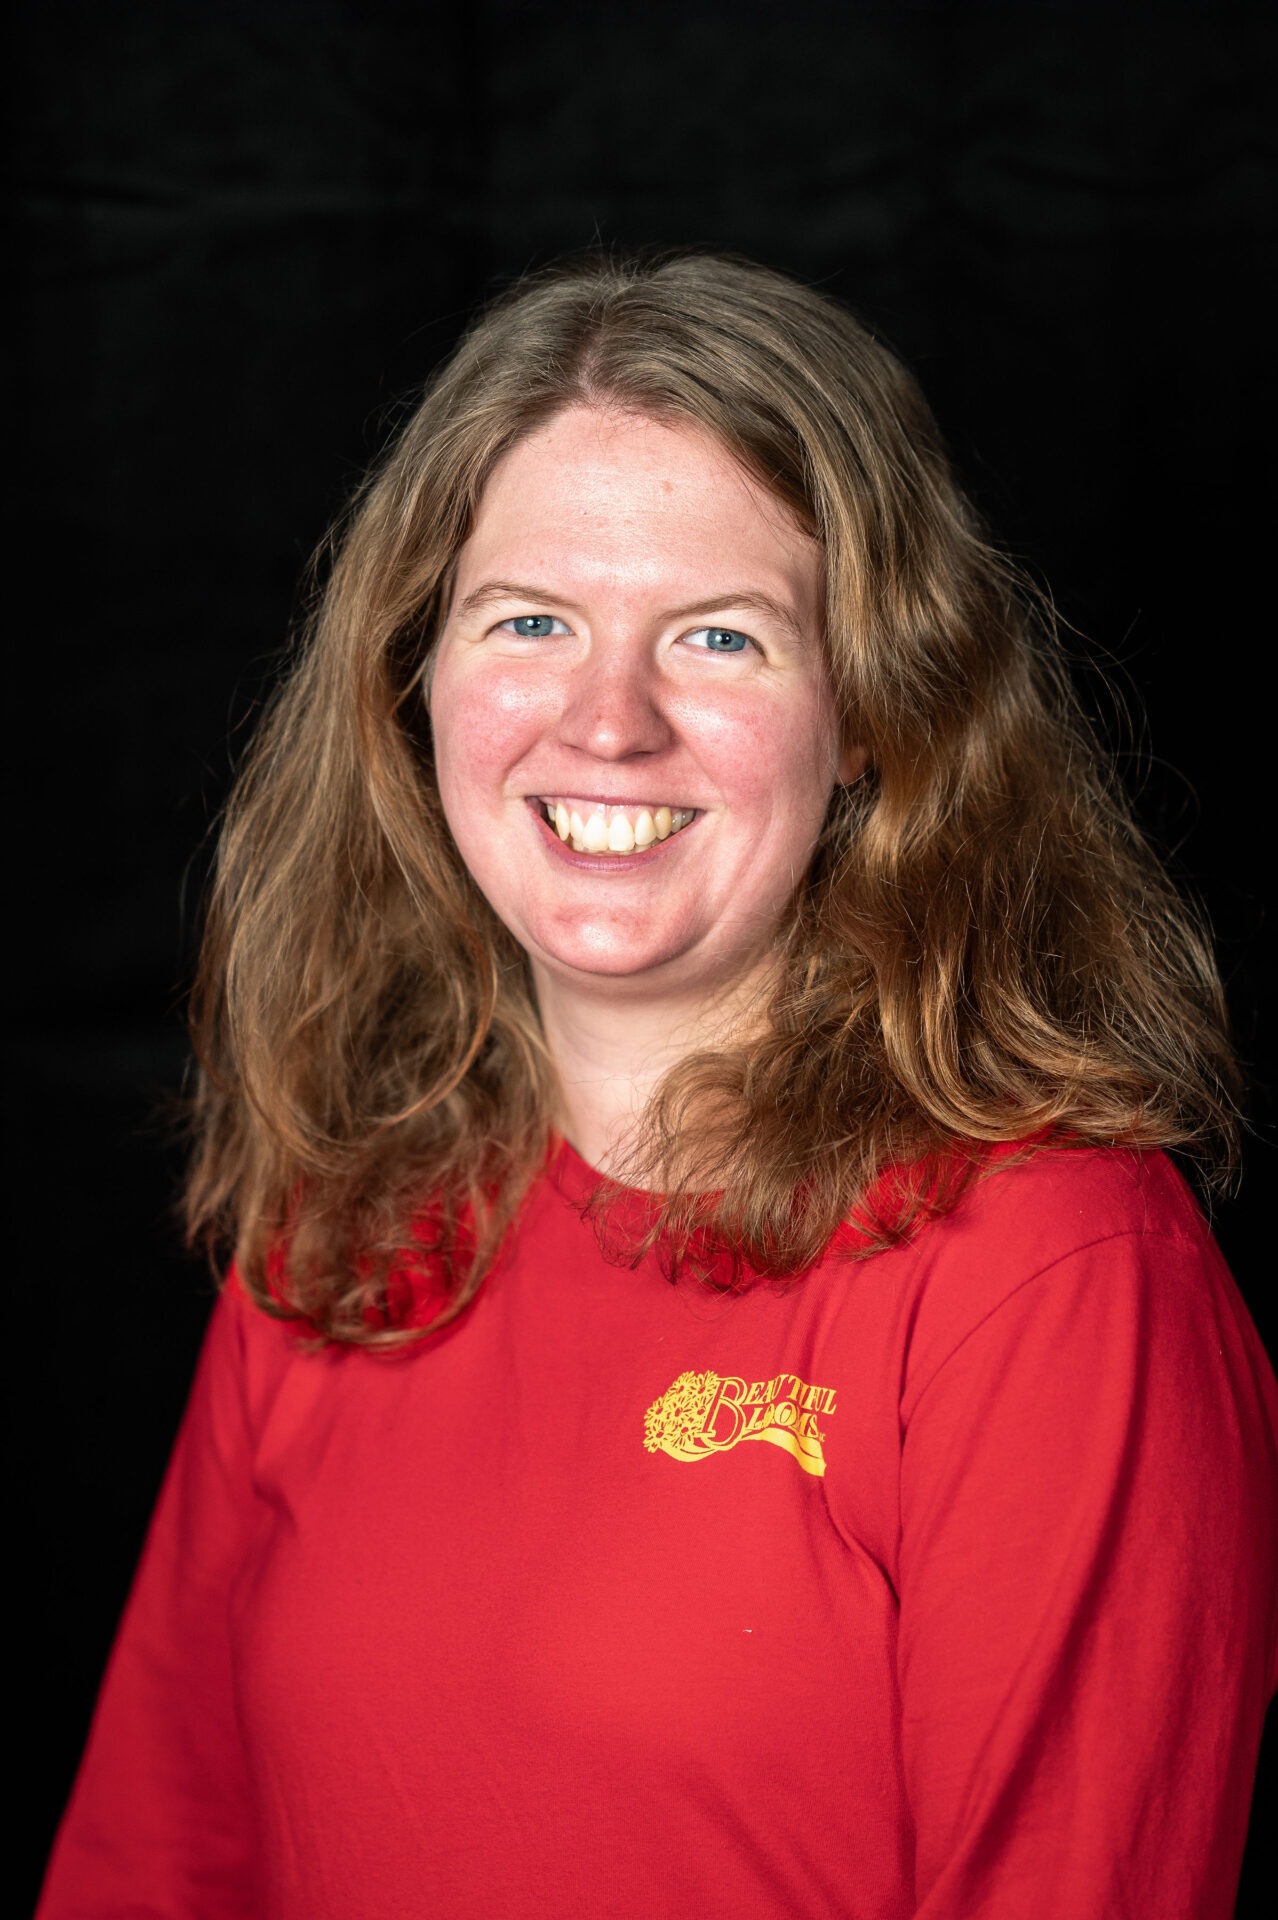 A smiling person with long blond hair wearing a red shirt with a "Beautiful Blonde" logo in front of a black background.